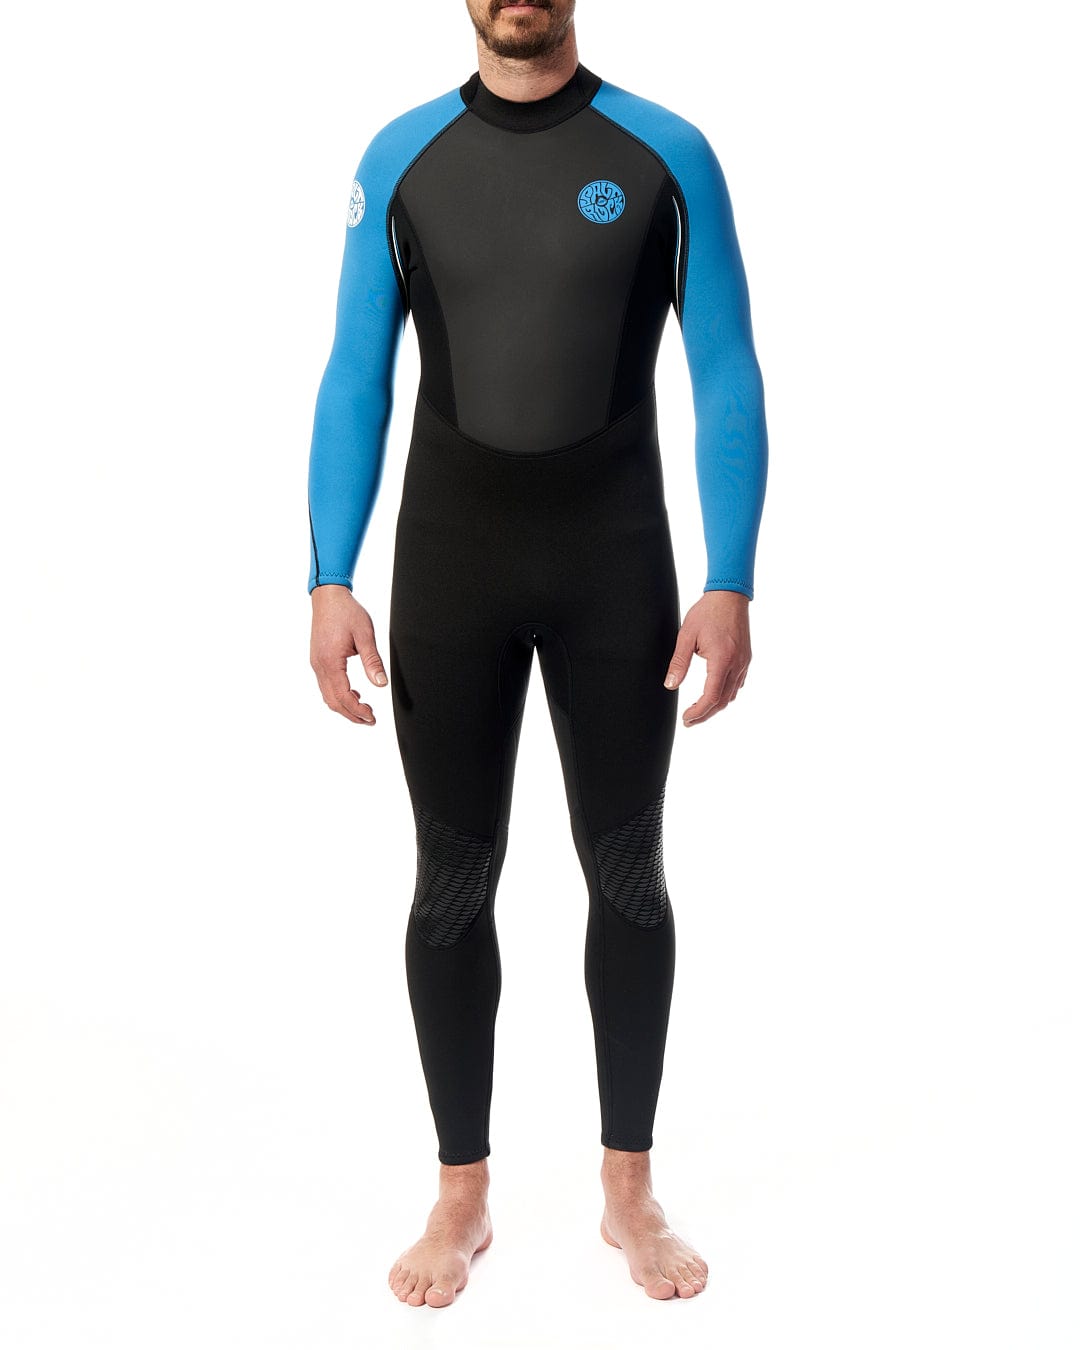 A man is standing in front of a white background in a Saltrock Core - Mens 3/2 Full Wetsuit - Blue/Black.